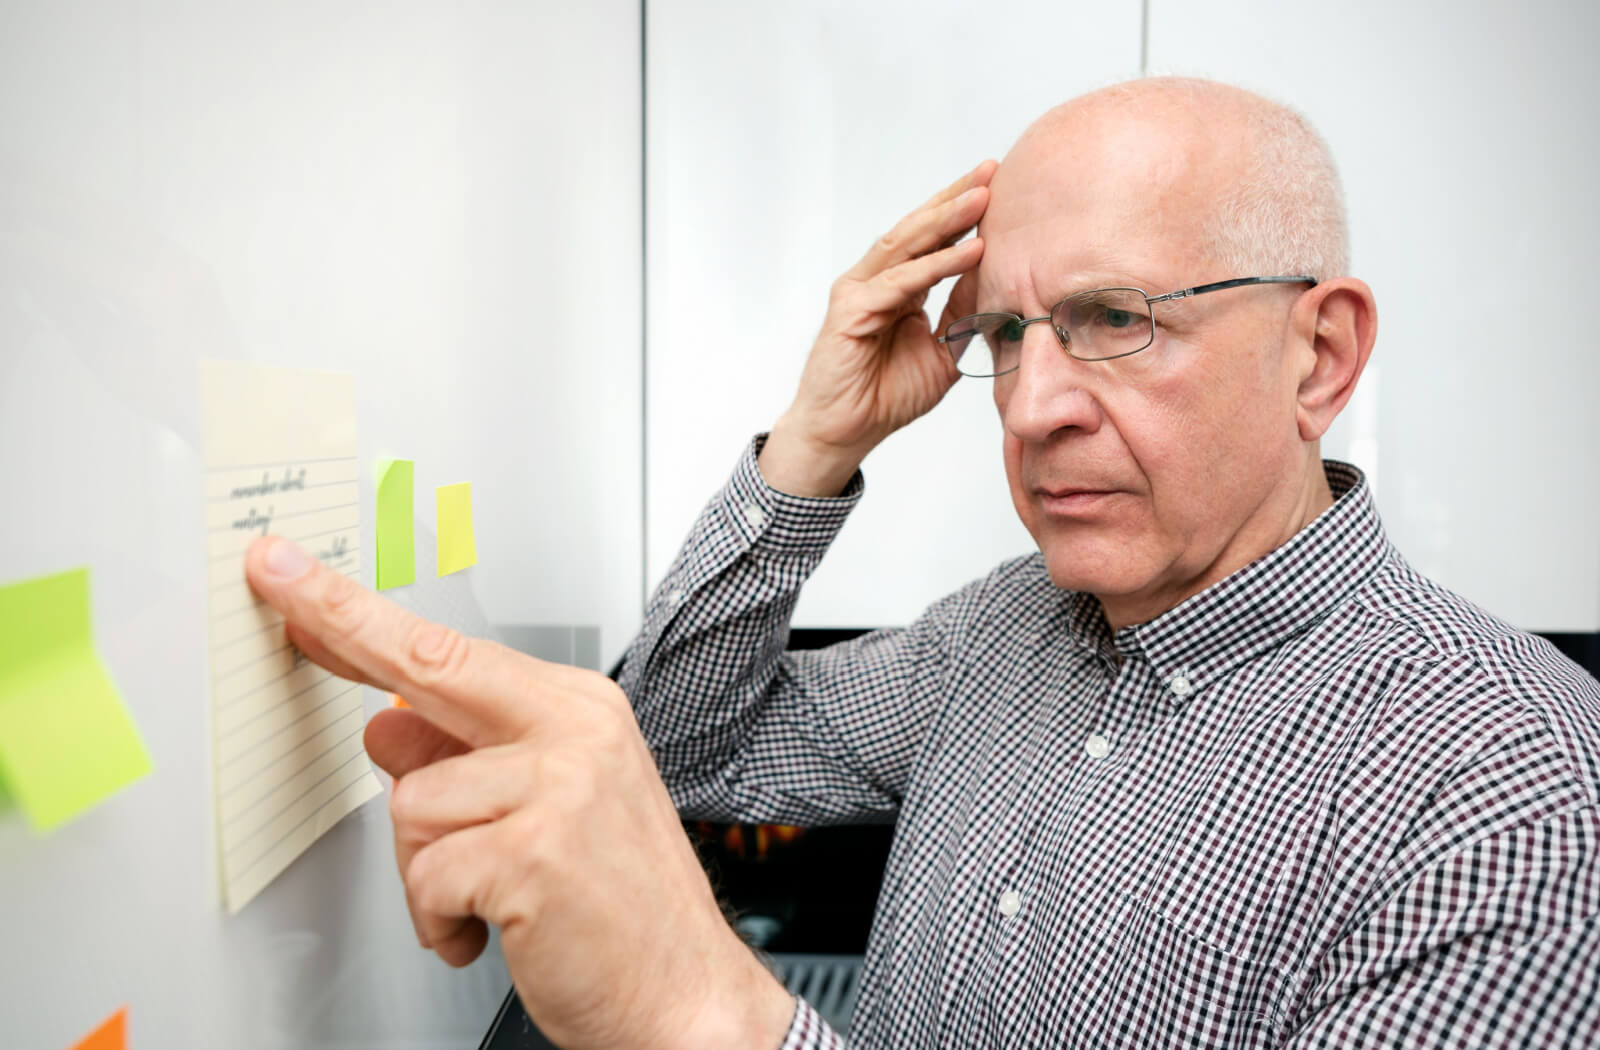 A senior man trying to remember what the reminder on the sticky note is for.